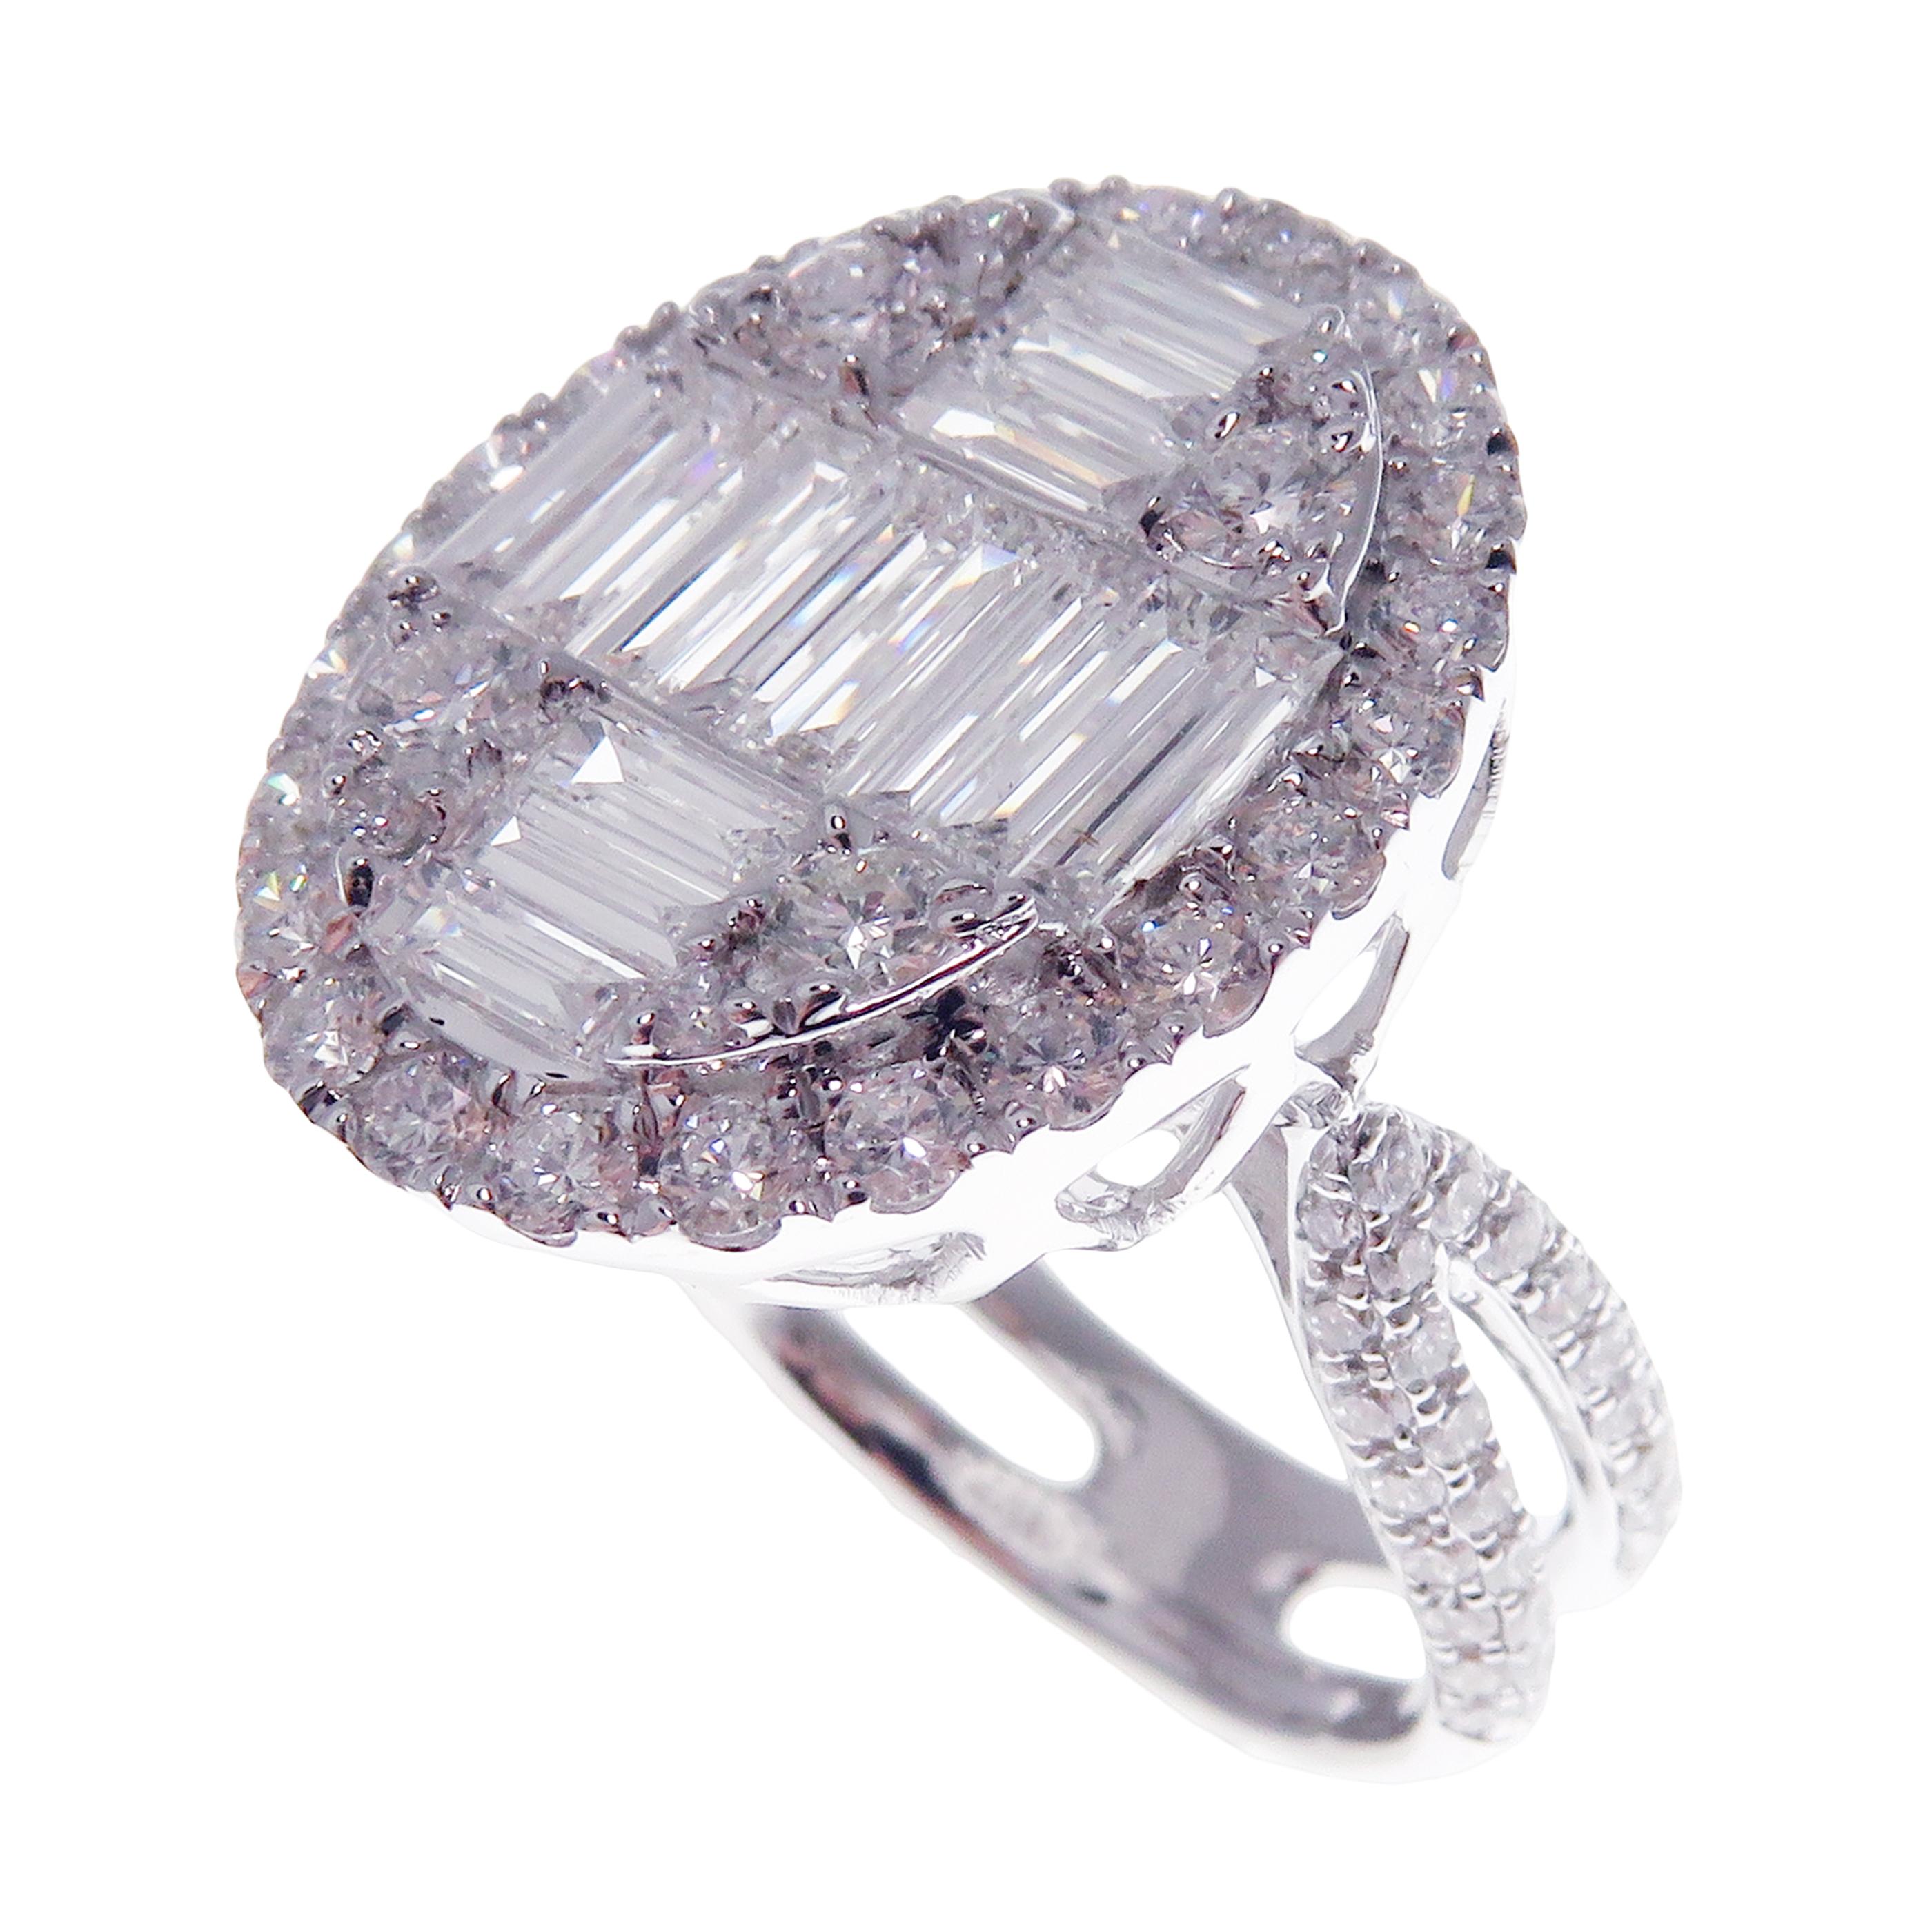 This baguette oval diamond ring is crafted in 18-karat white gold, weighing approximately 2.92 total carats of SI-V Quality white diamonds. Diamond embellishments on ring shank and a modern design brings out the beauty of the ring. This ring is